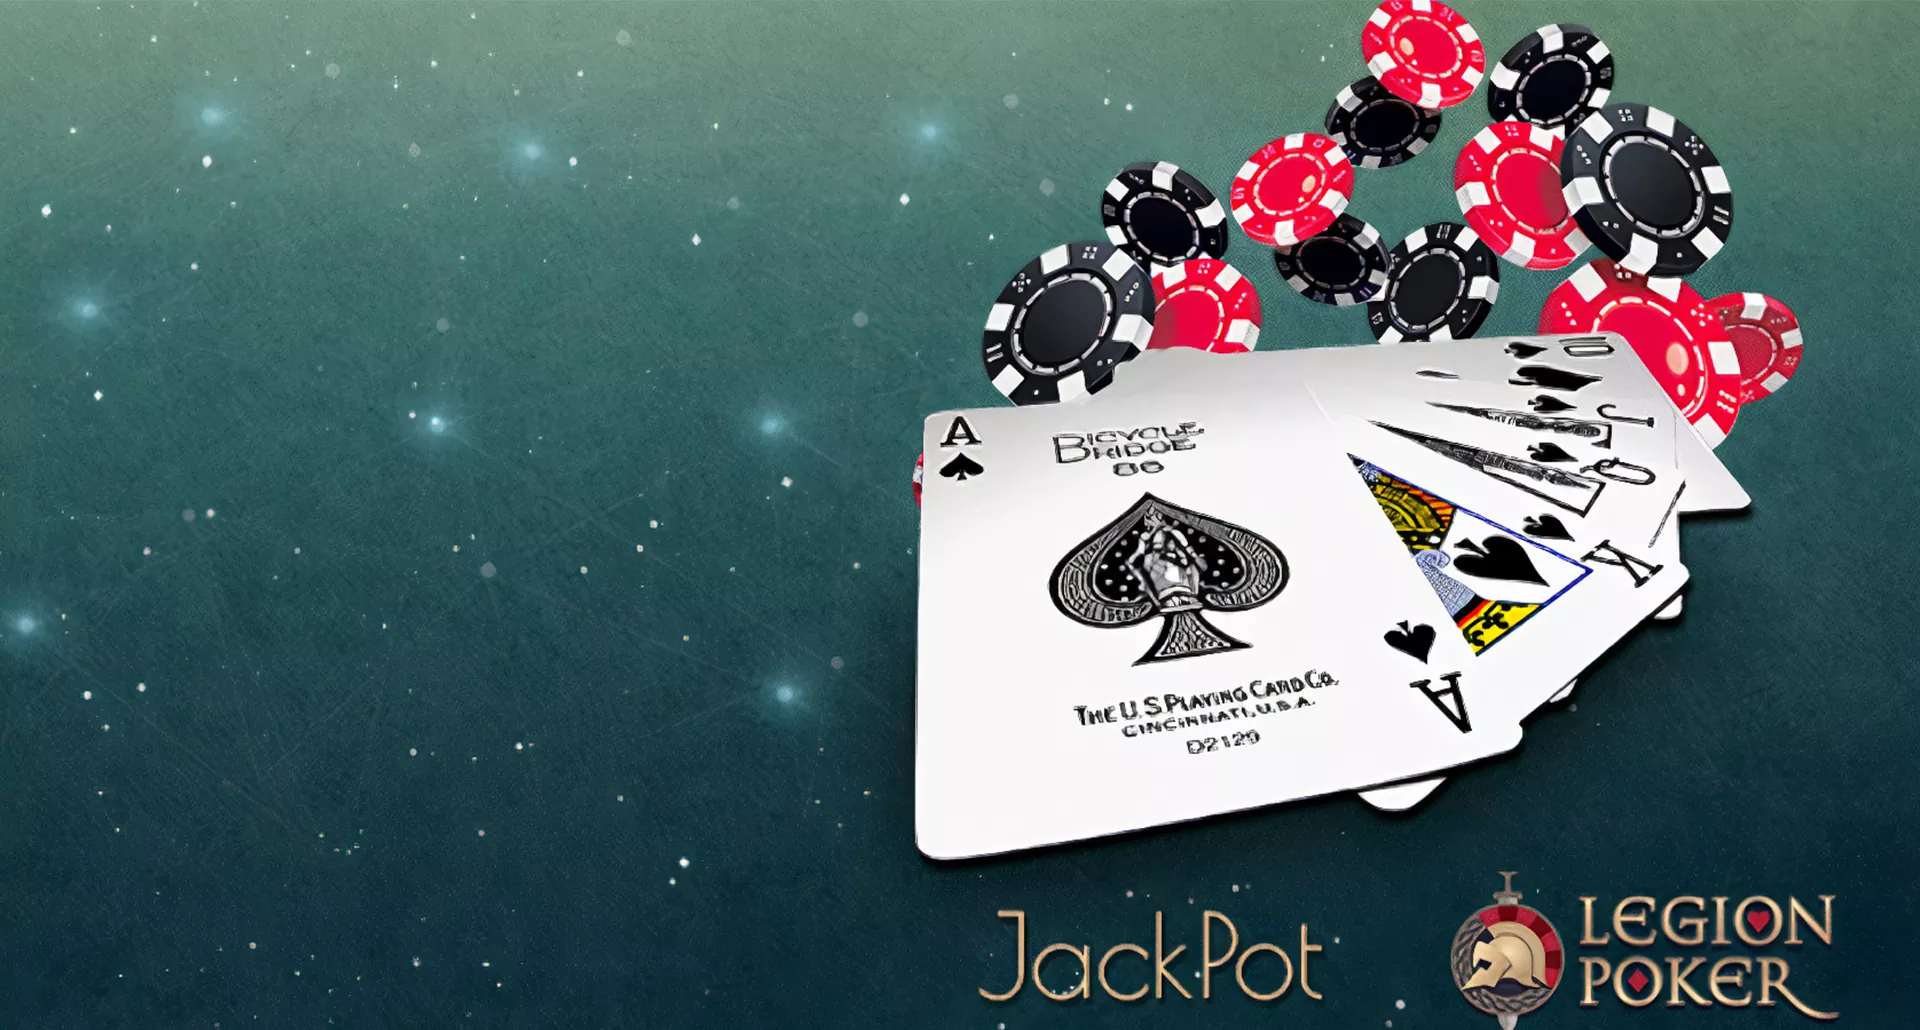 There are freerolls, jackpots and spins tourneys.